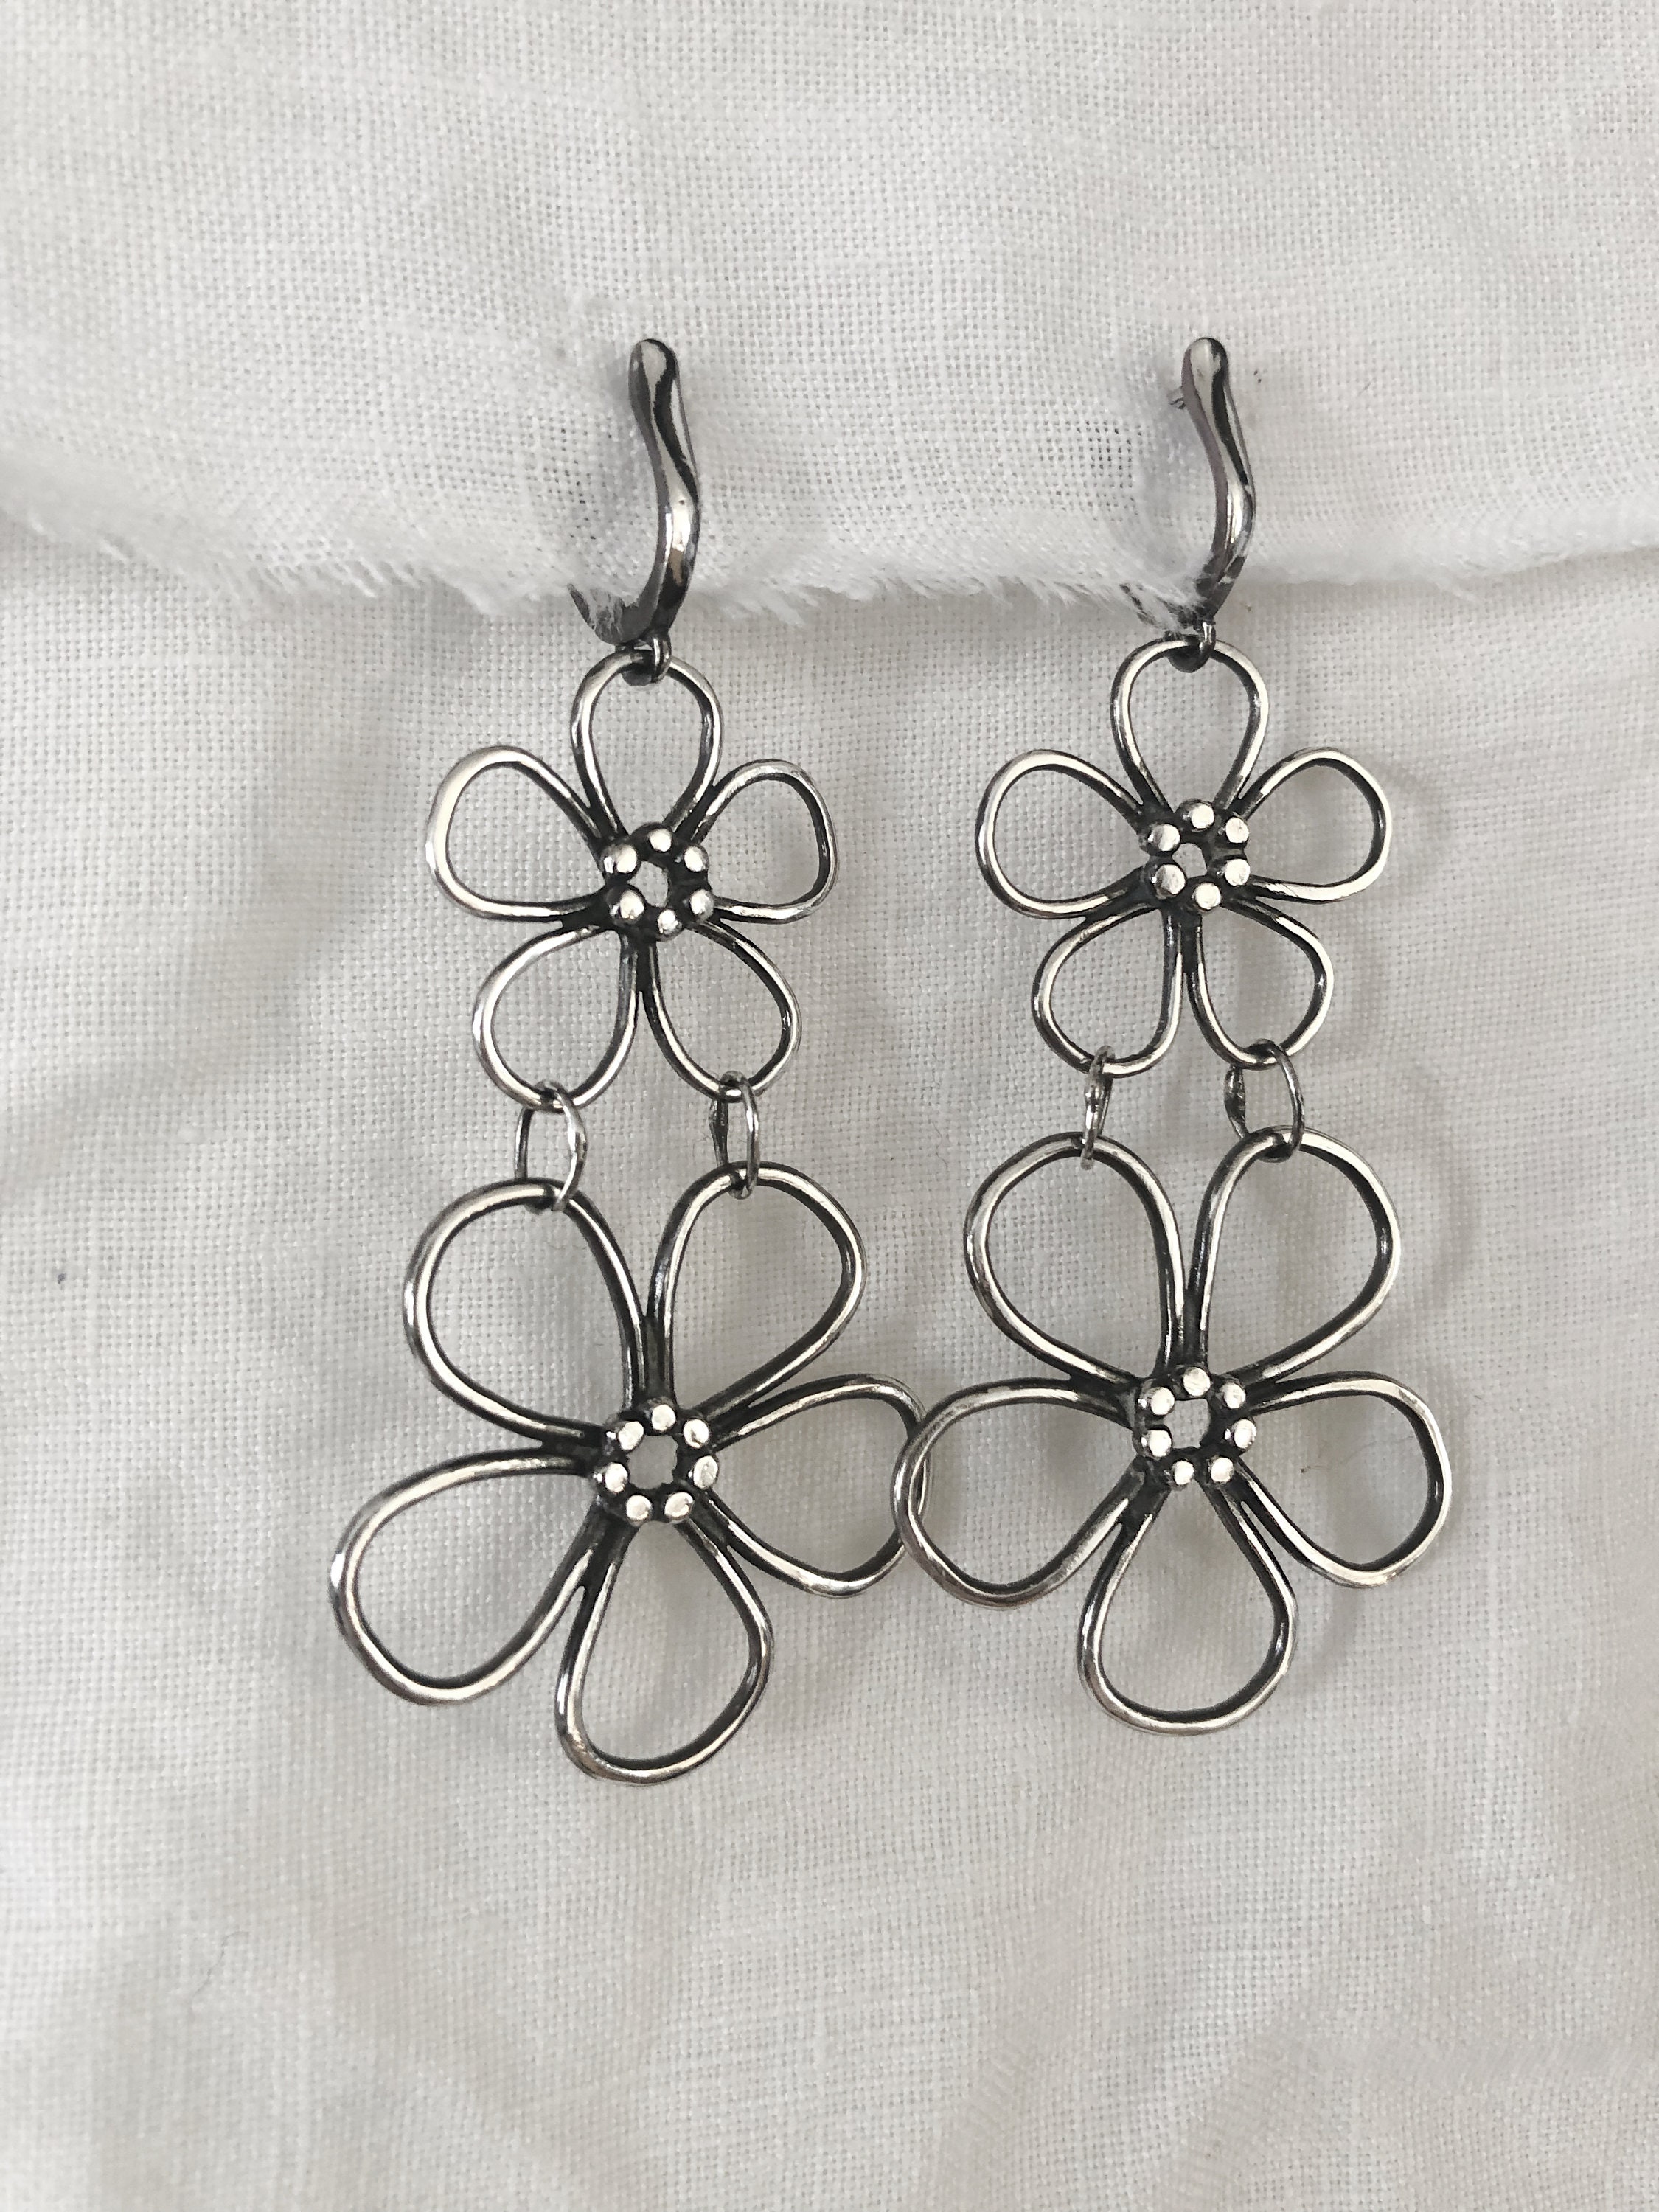 Blossom Large Silvertone Light Weight Statement Earrings with Accent Bead options from The Sculptural Collection Basic Metal